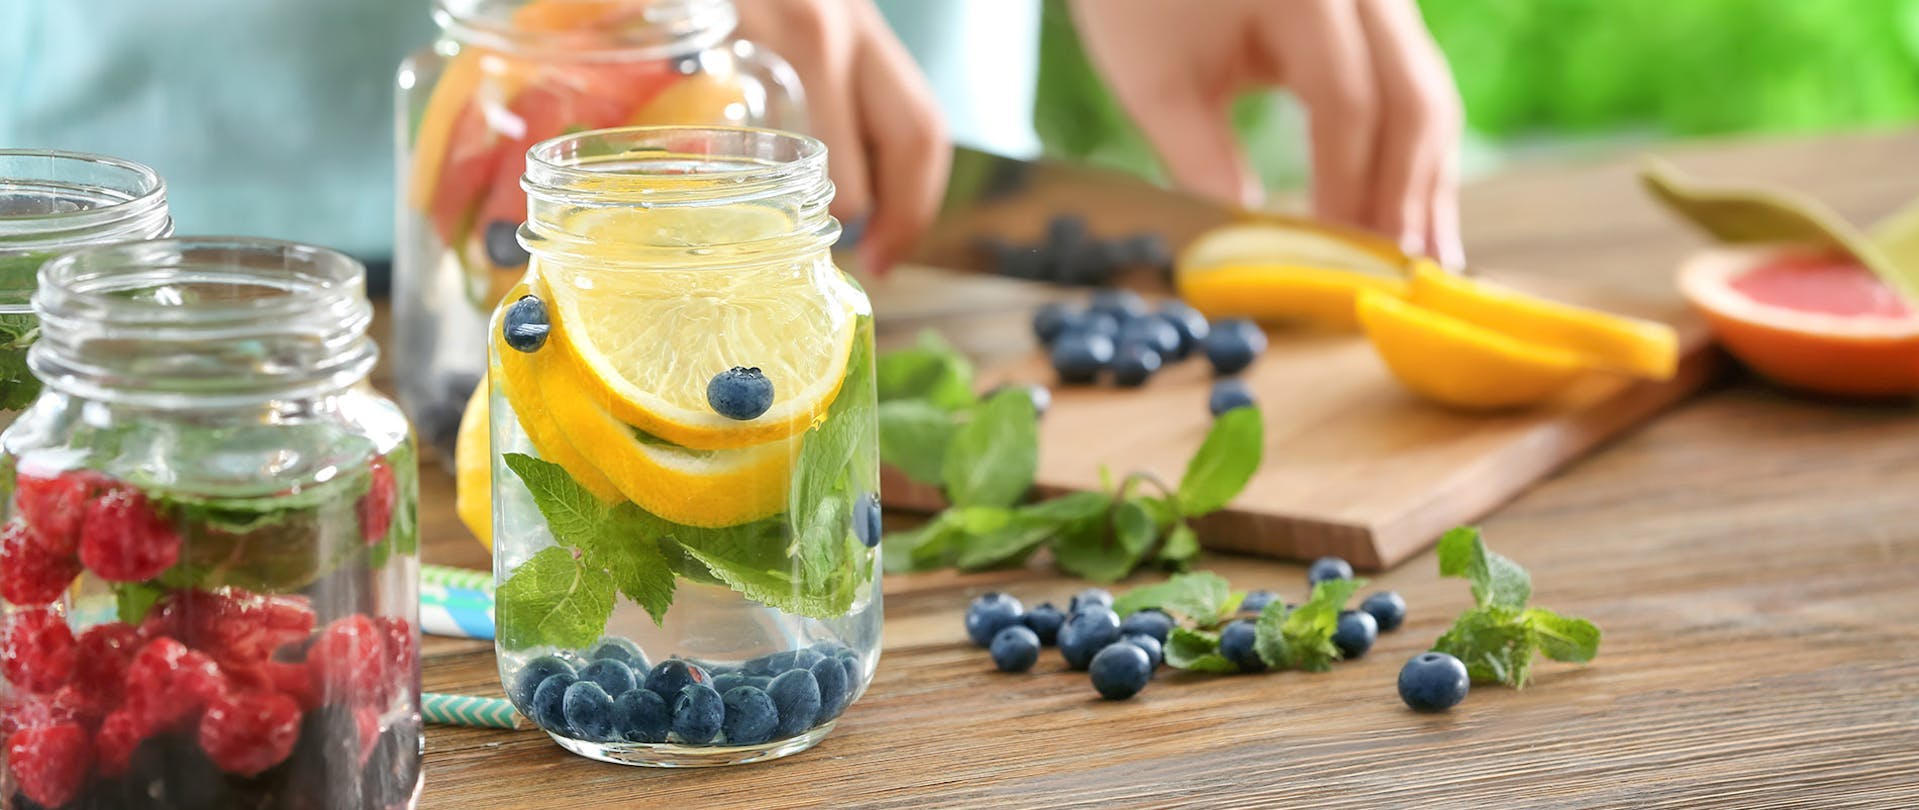 Fancy and Fun Infused Water Recipes for Any Occasion